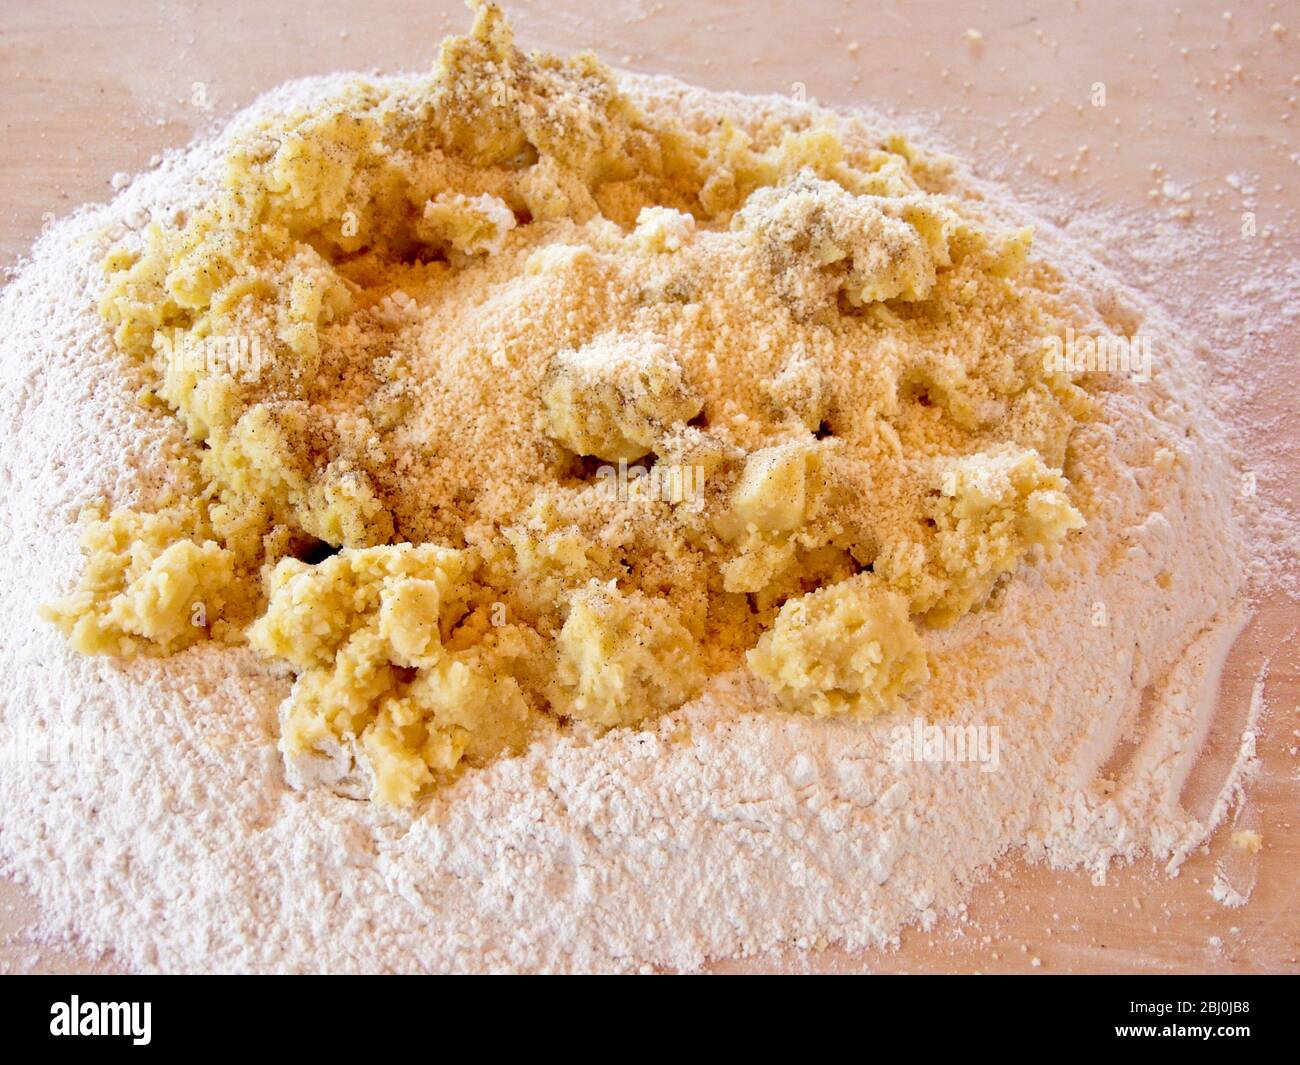 Mixing pressed potato and graed parmesan into flour for making gnocchi. Stock Photo